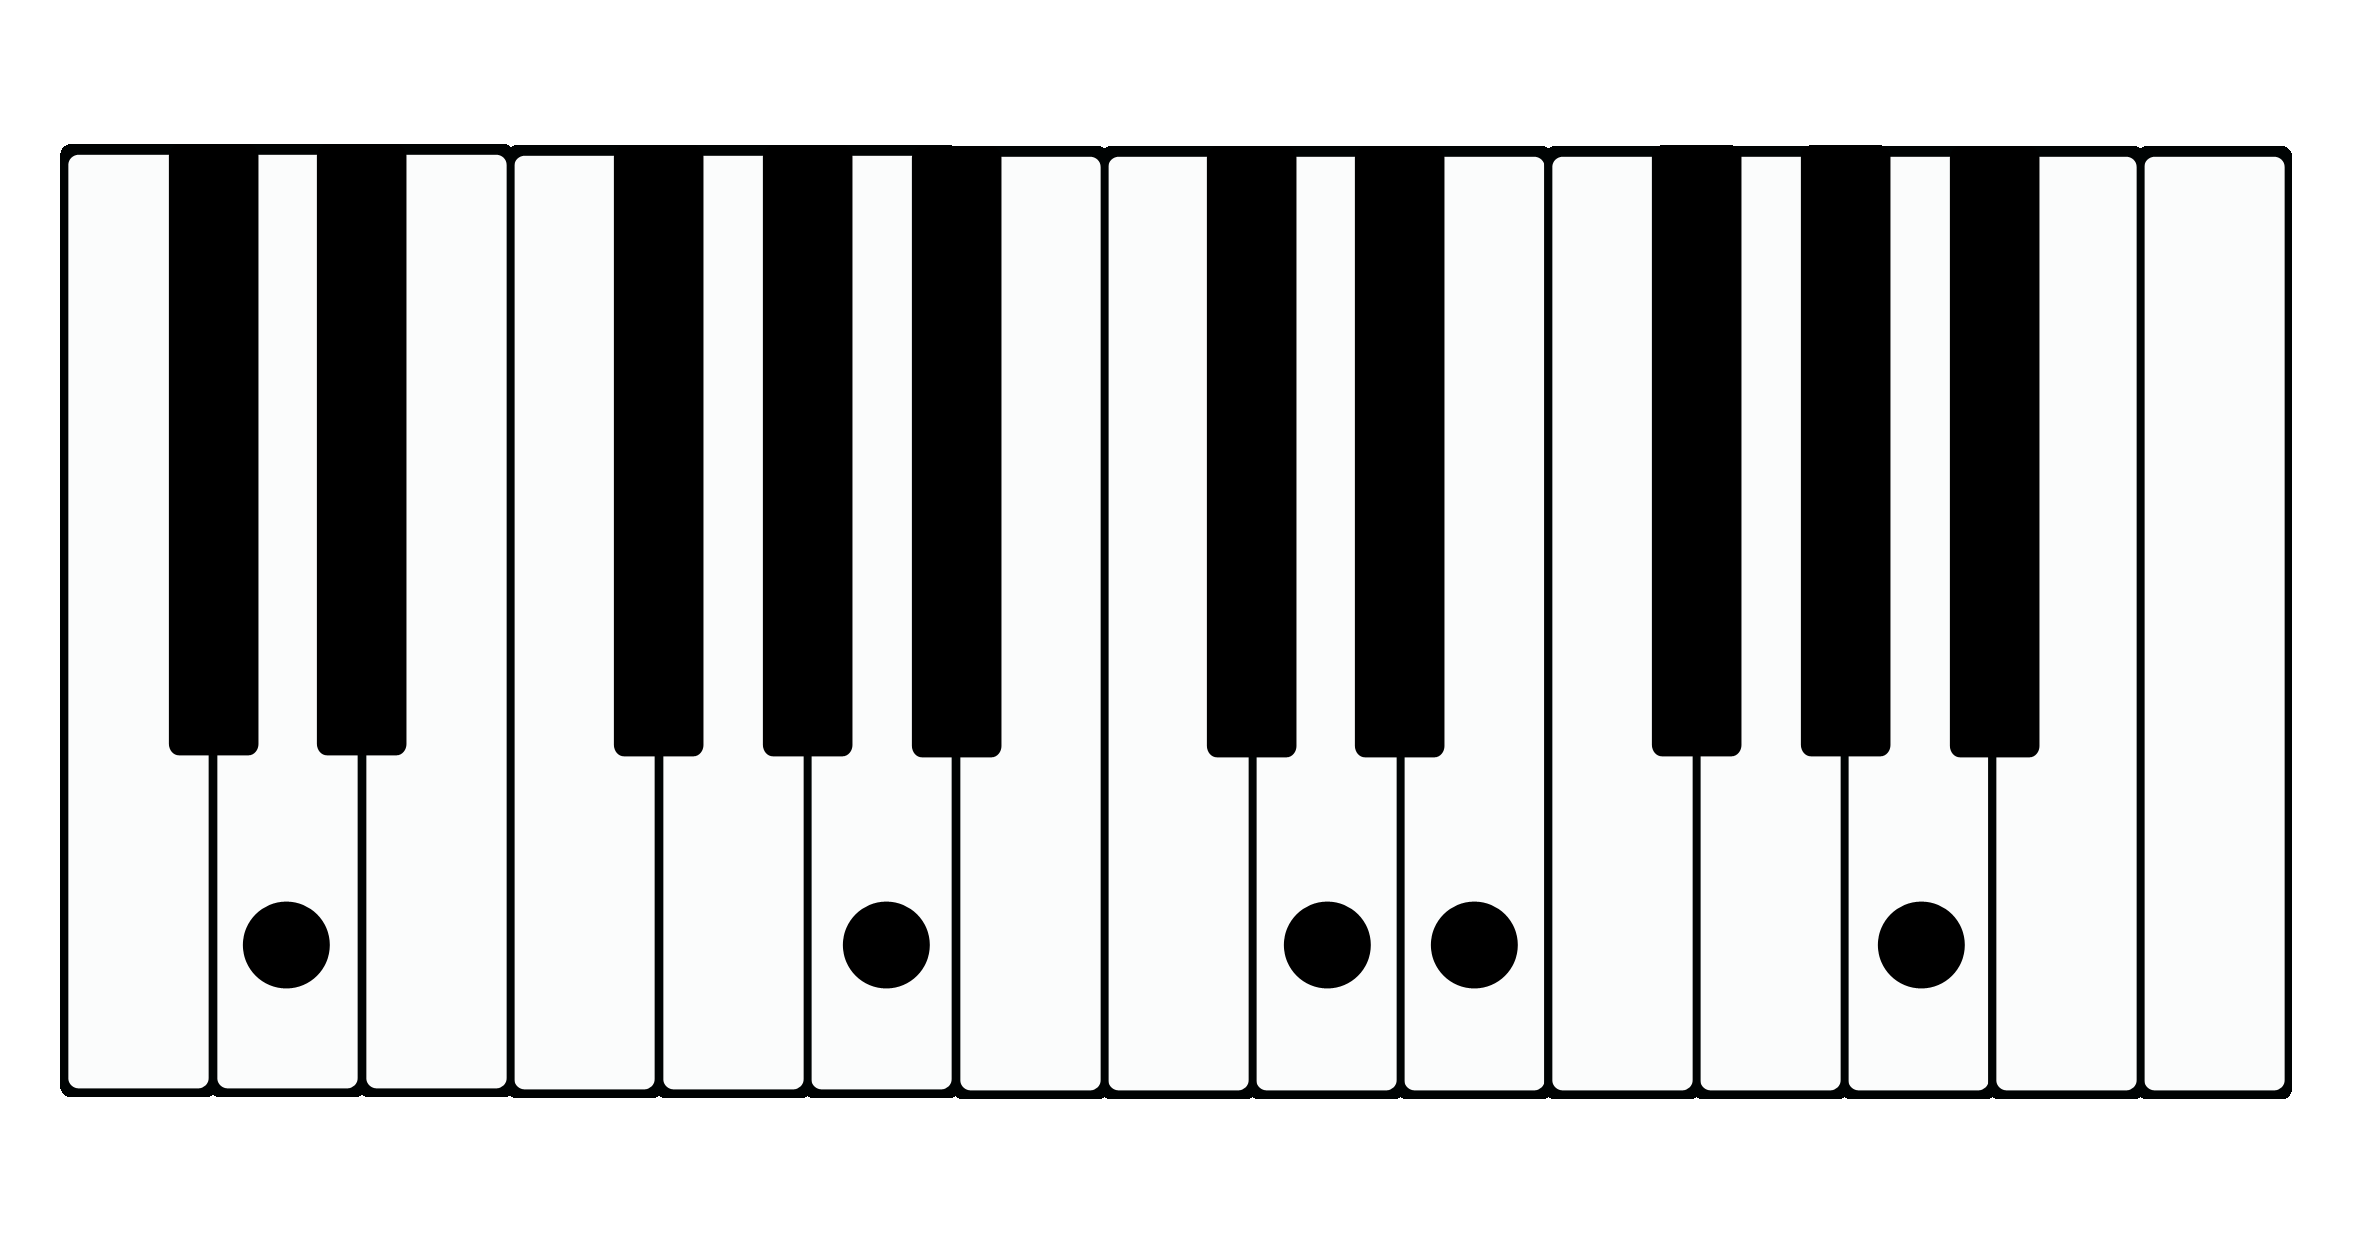 Worship Keyboard Chord of the Month – Dadd9(no 3rd)